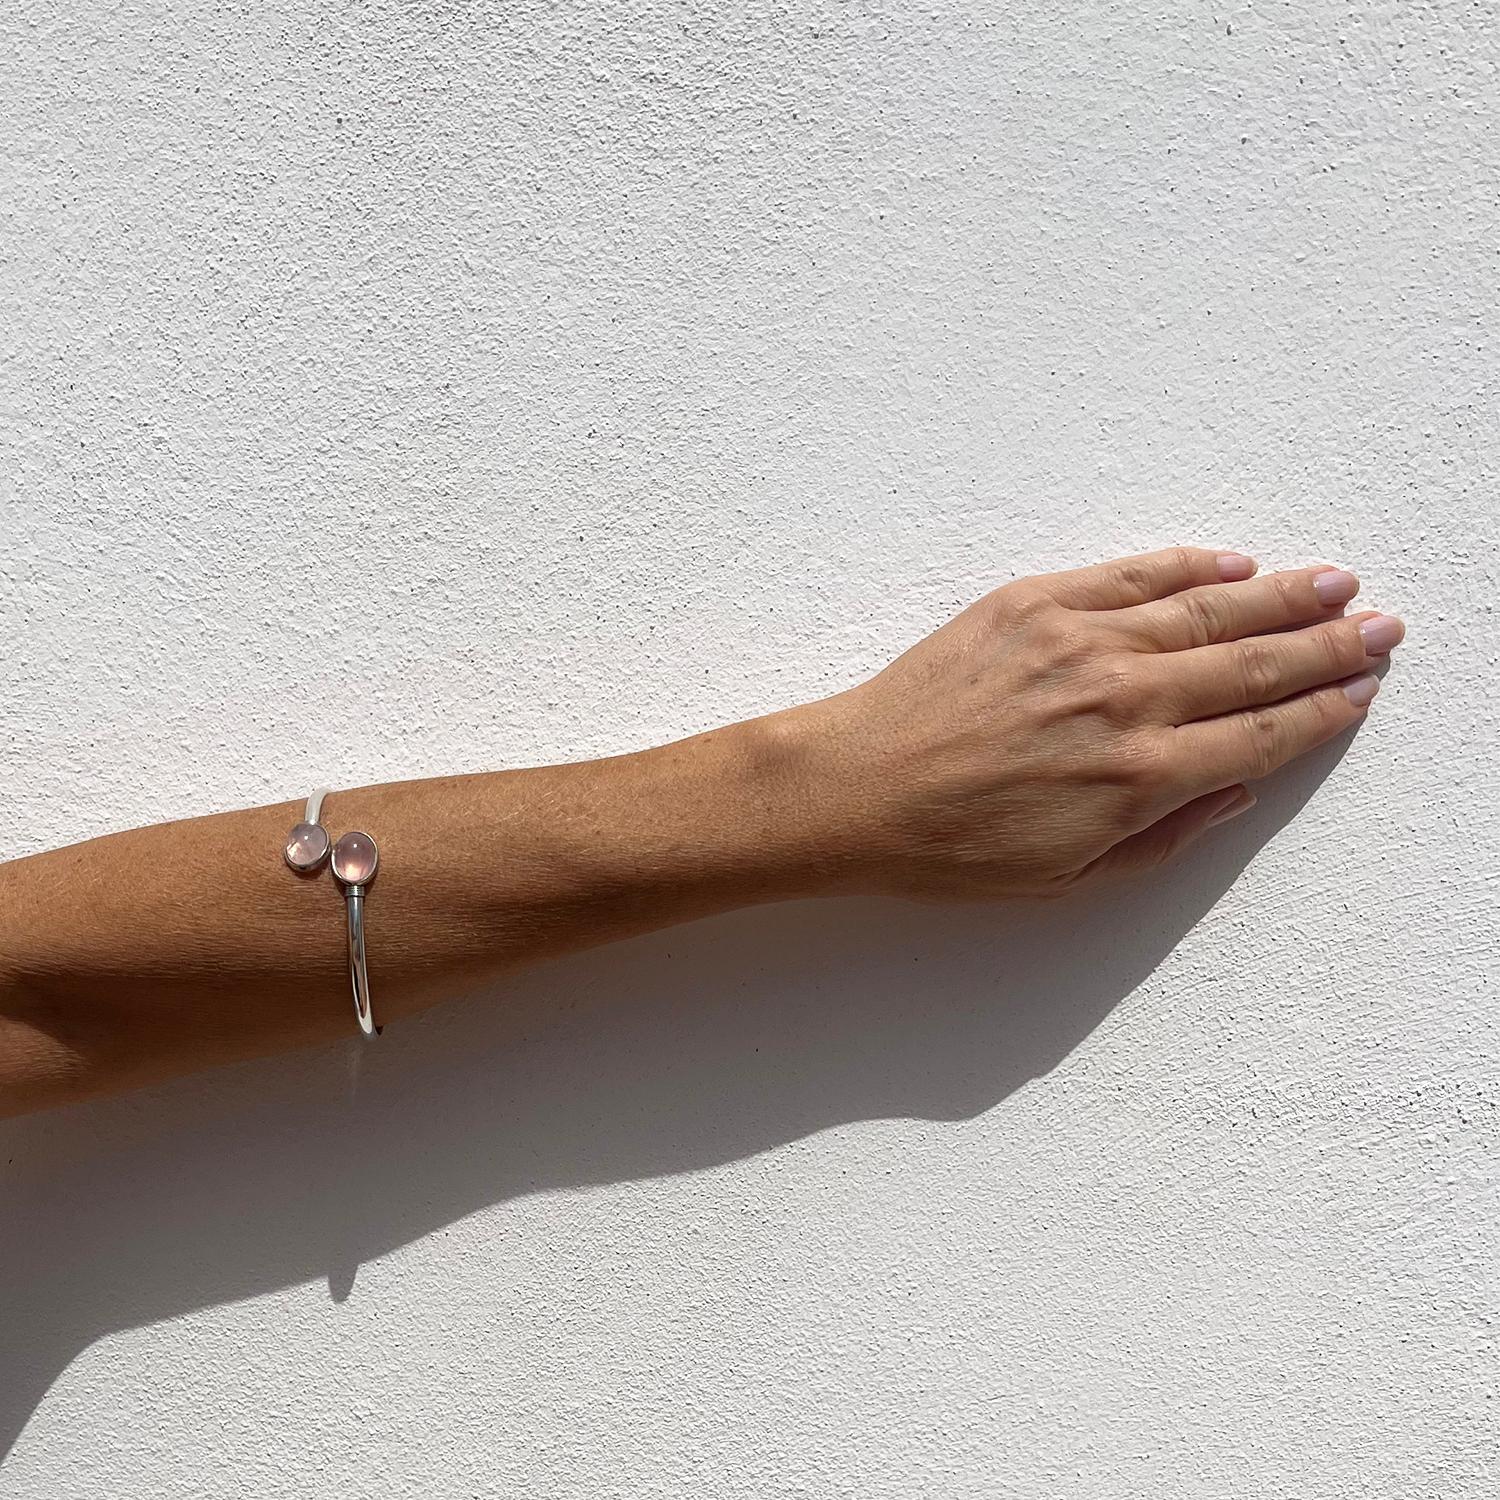 This sterling silver cuff bracelet is adorned with two beautiful cabochon cut rosen quartz stones. The cuff bracelet gently drops down the wrist but can, because it is somewhat adjustable, just as easily be worn upwards on the arm.

This cuff